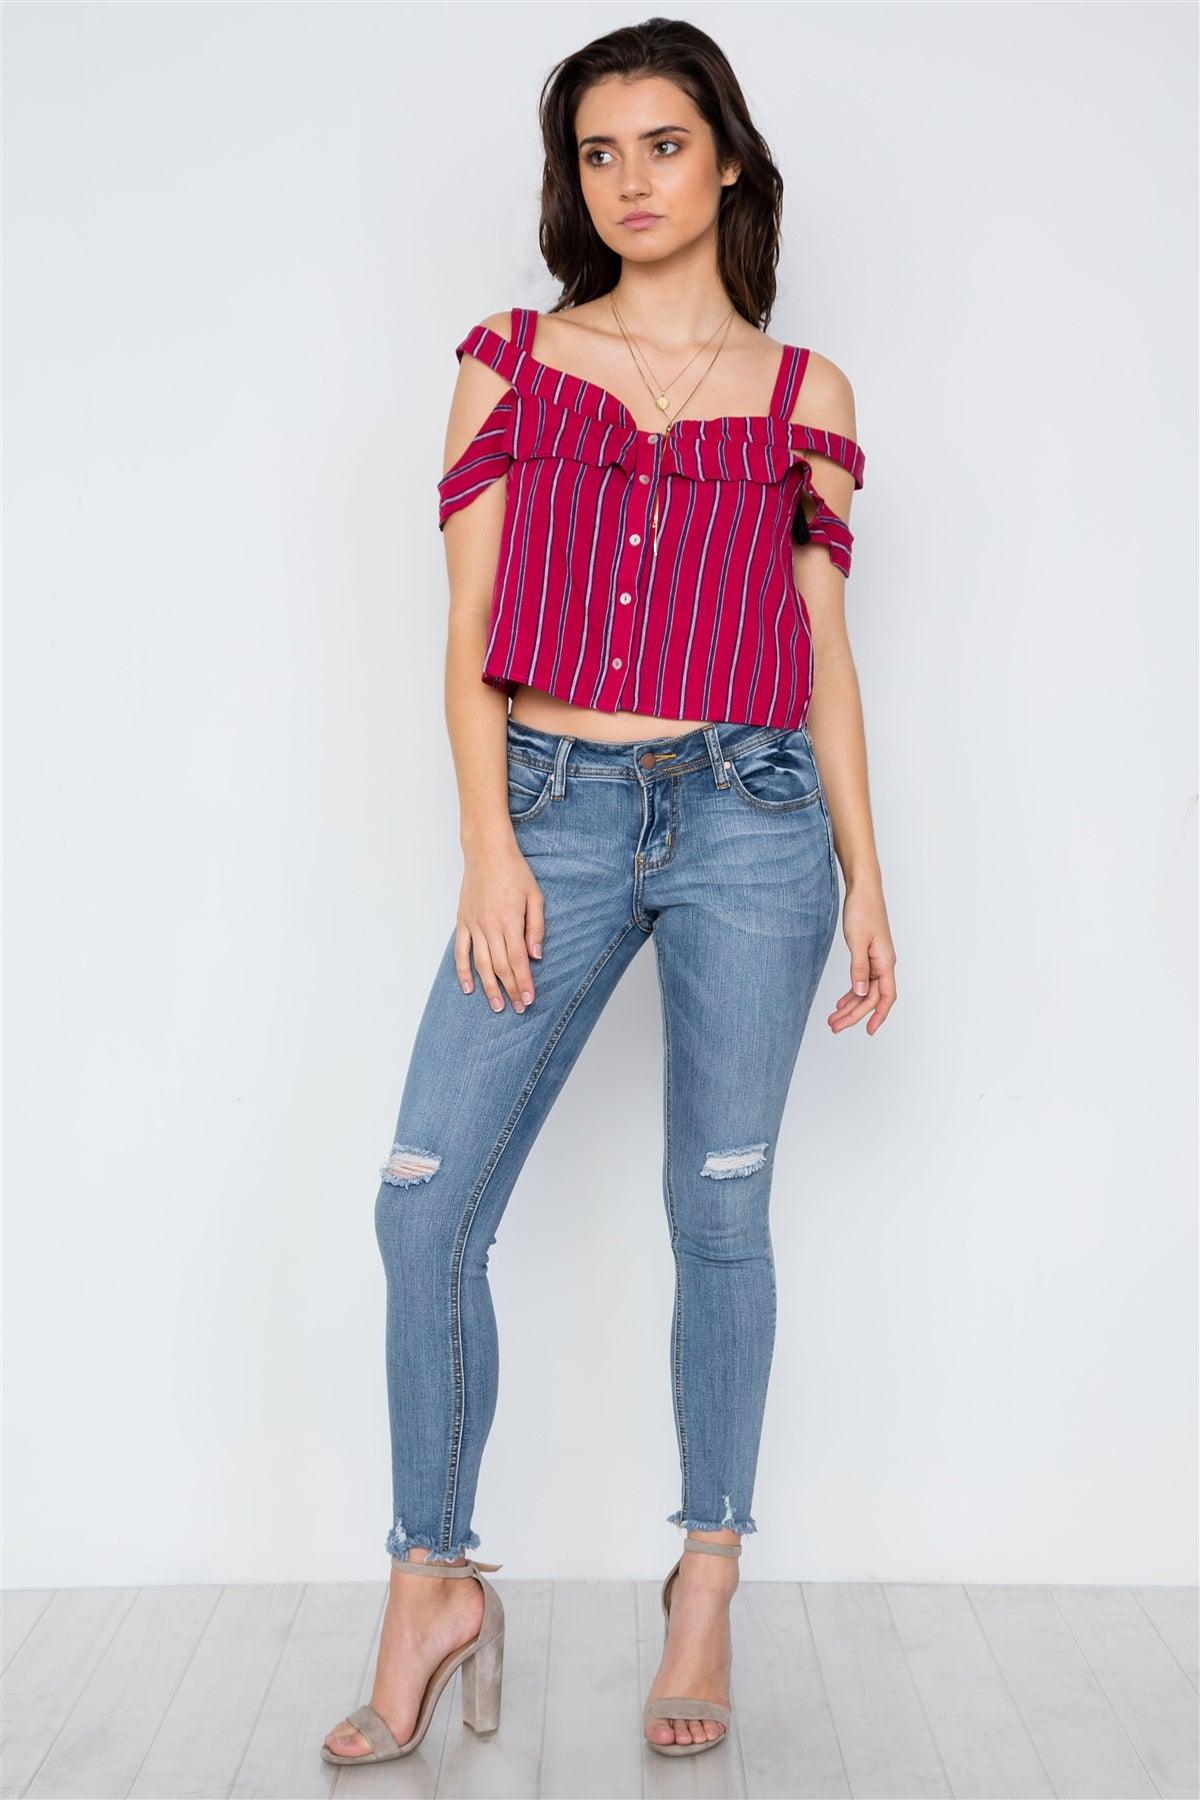 Red Striped Button Down Cut Out Flounce Boho Top / 3-2-1